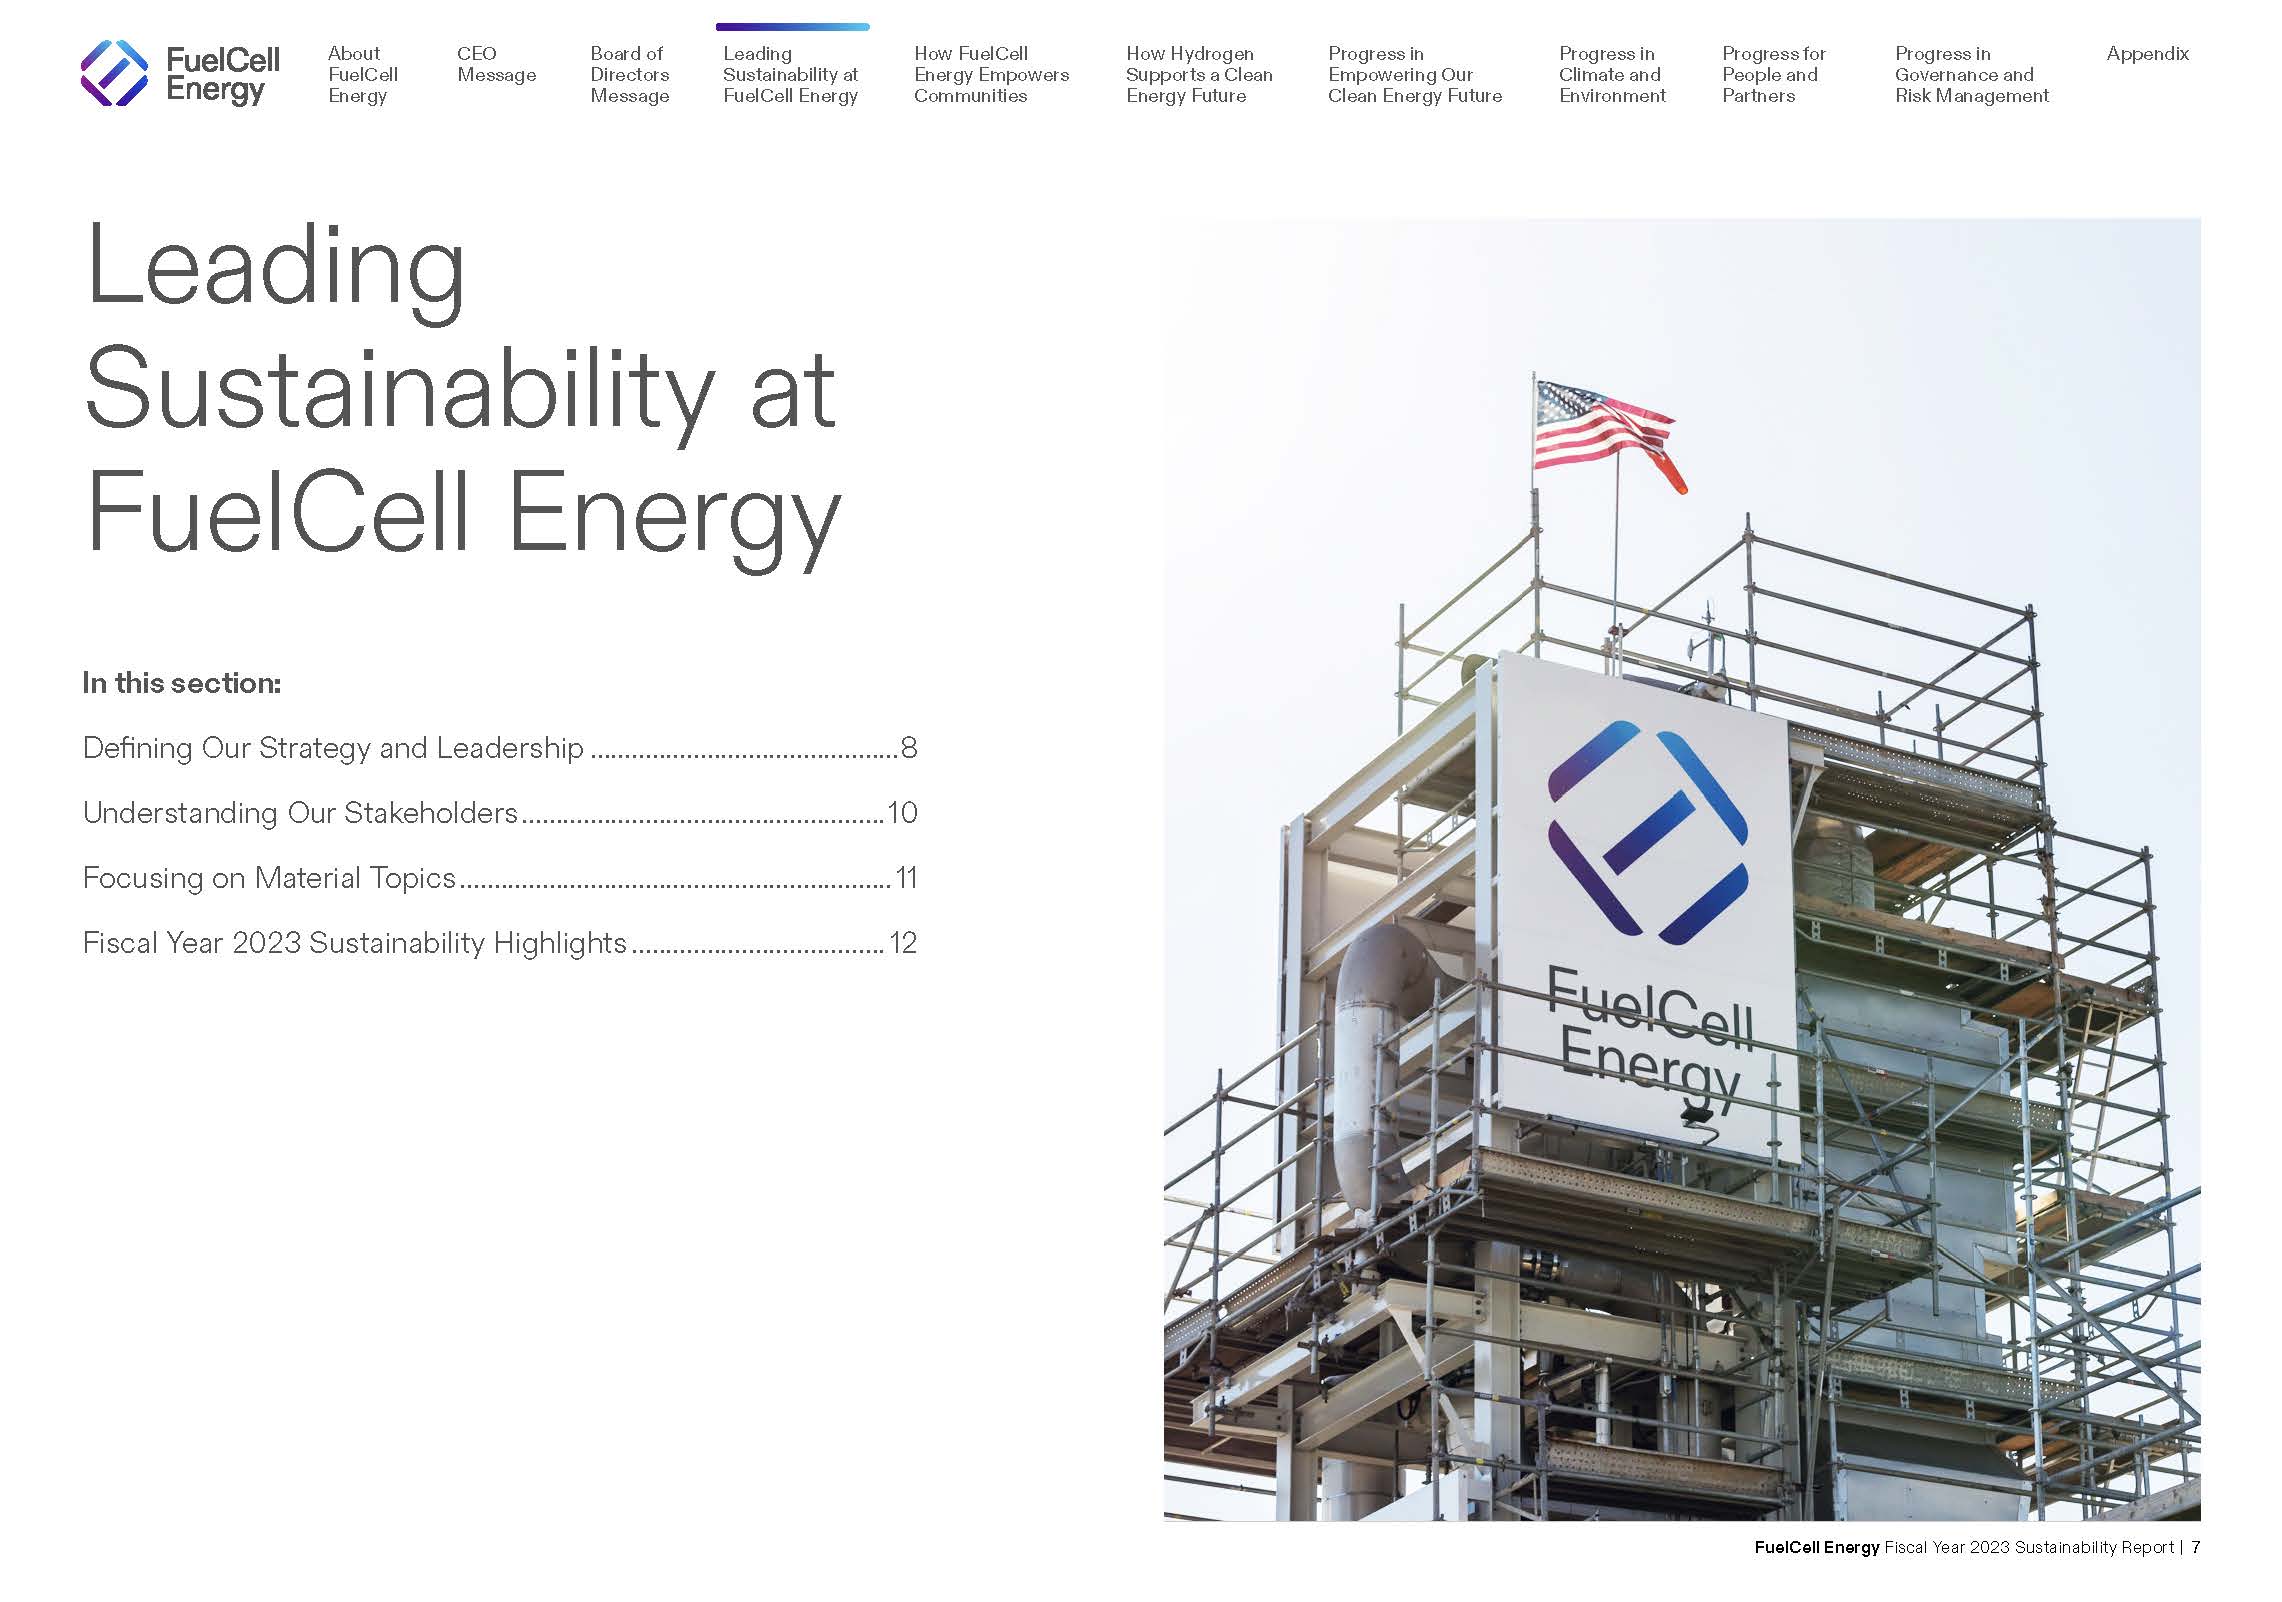 FuelCell Enery